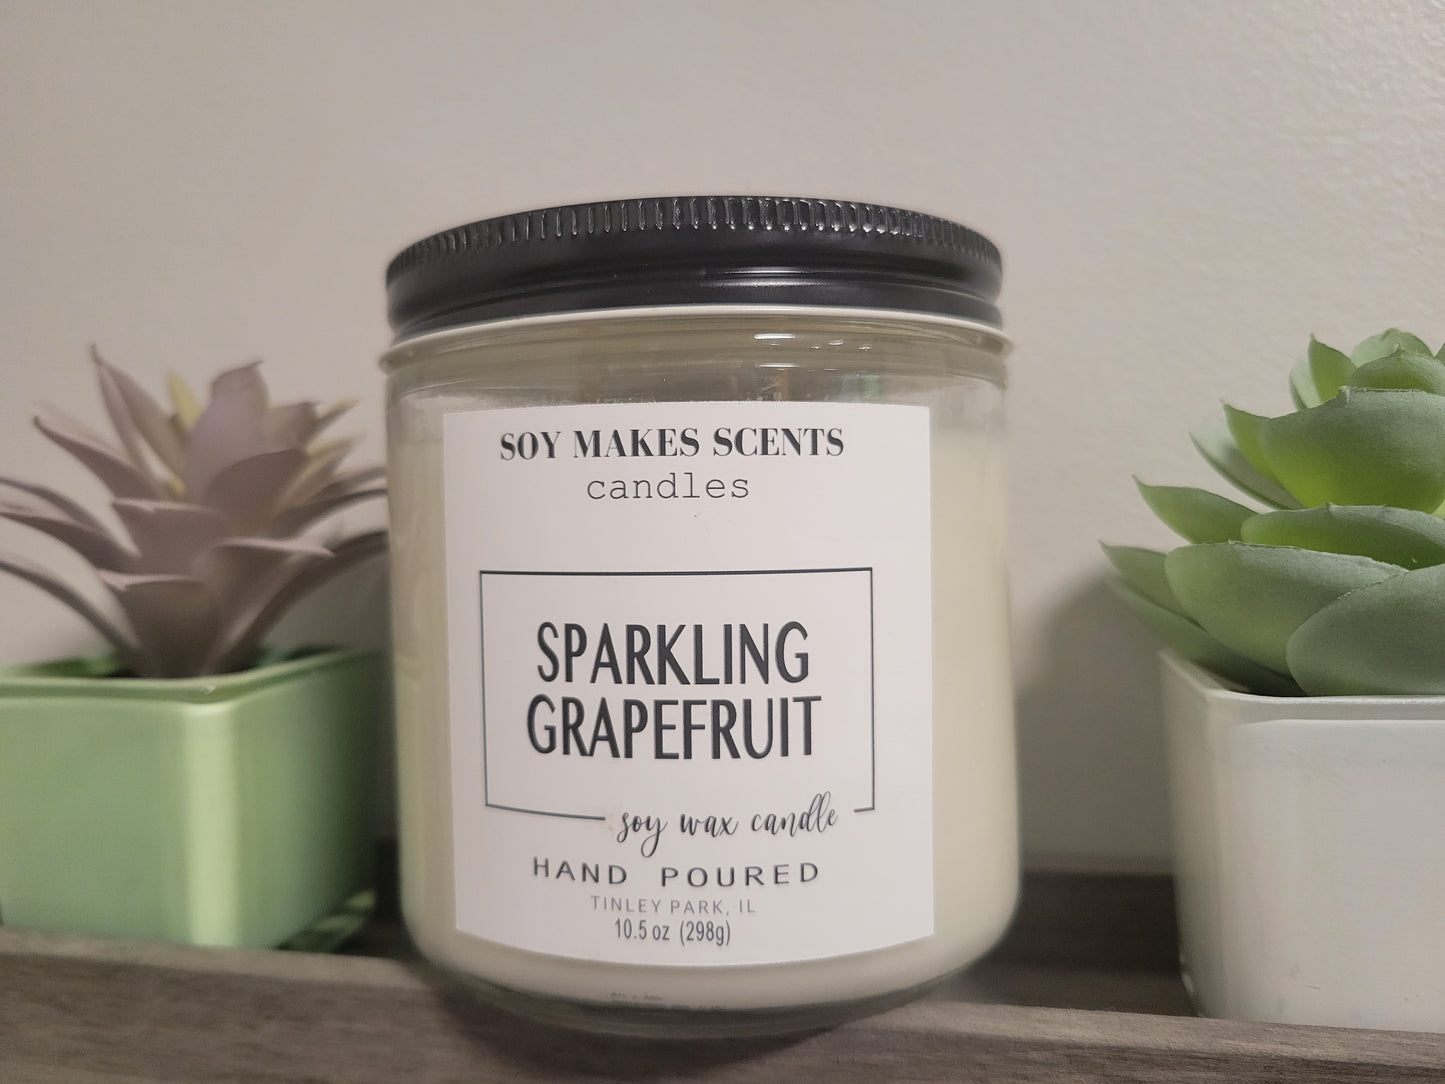 Sparkling Grapefruit 10.5oz soy wax candle